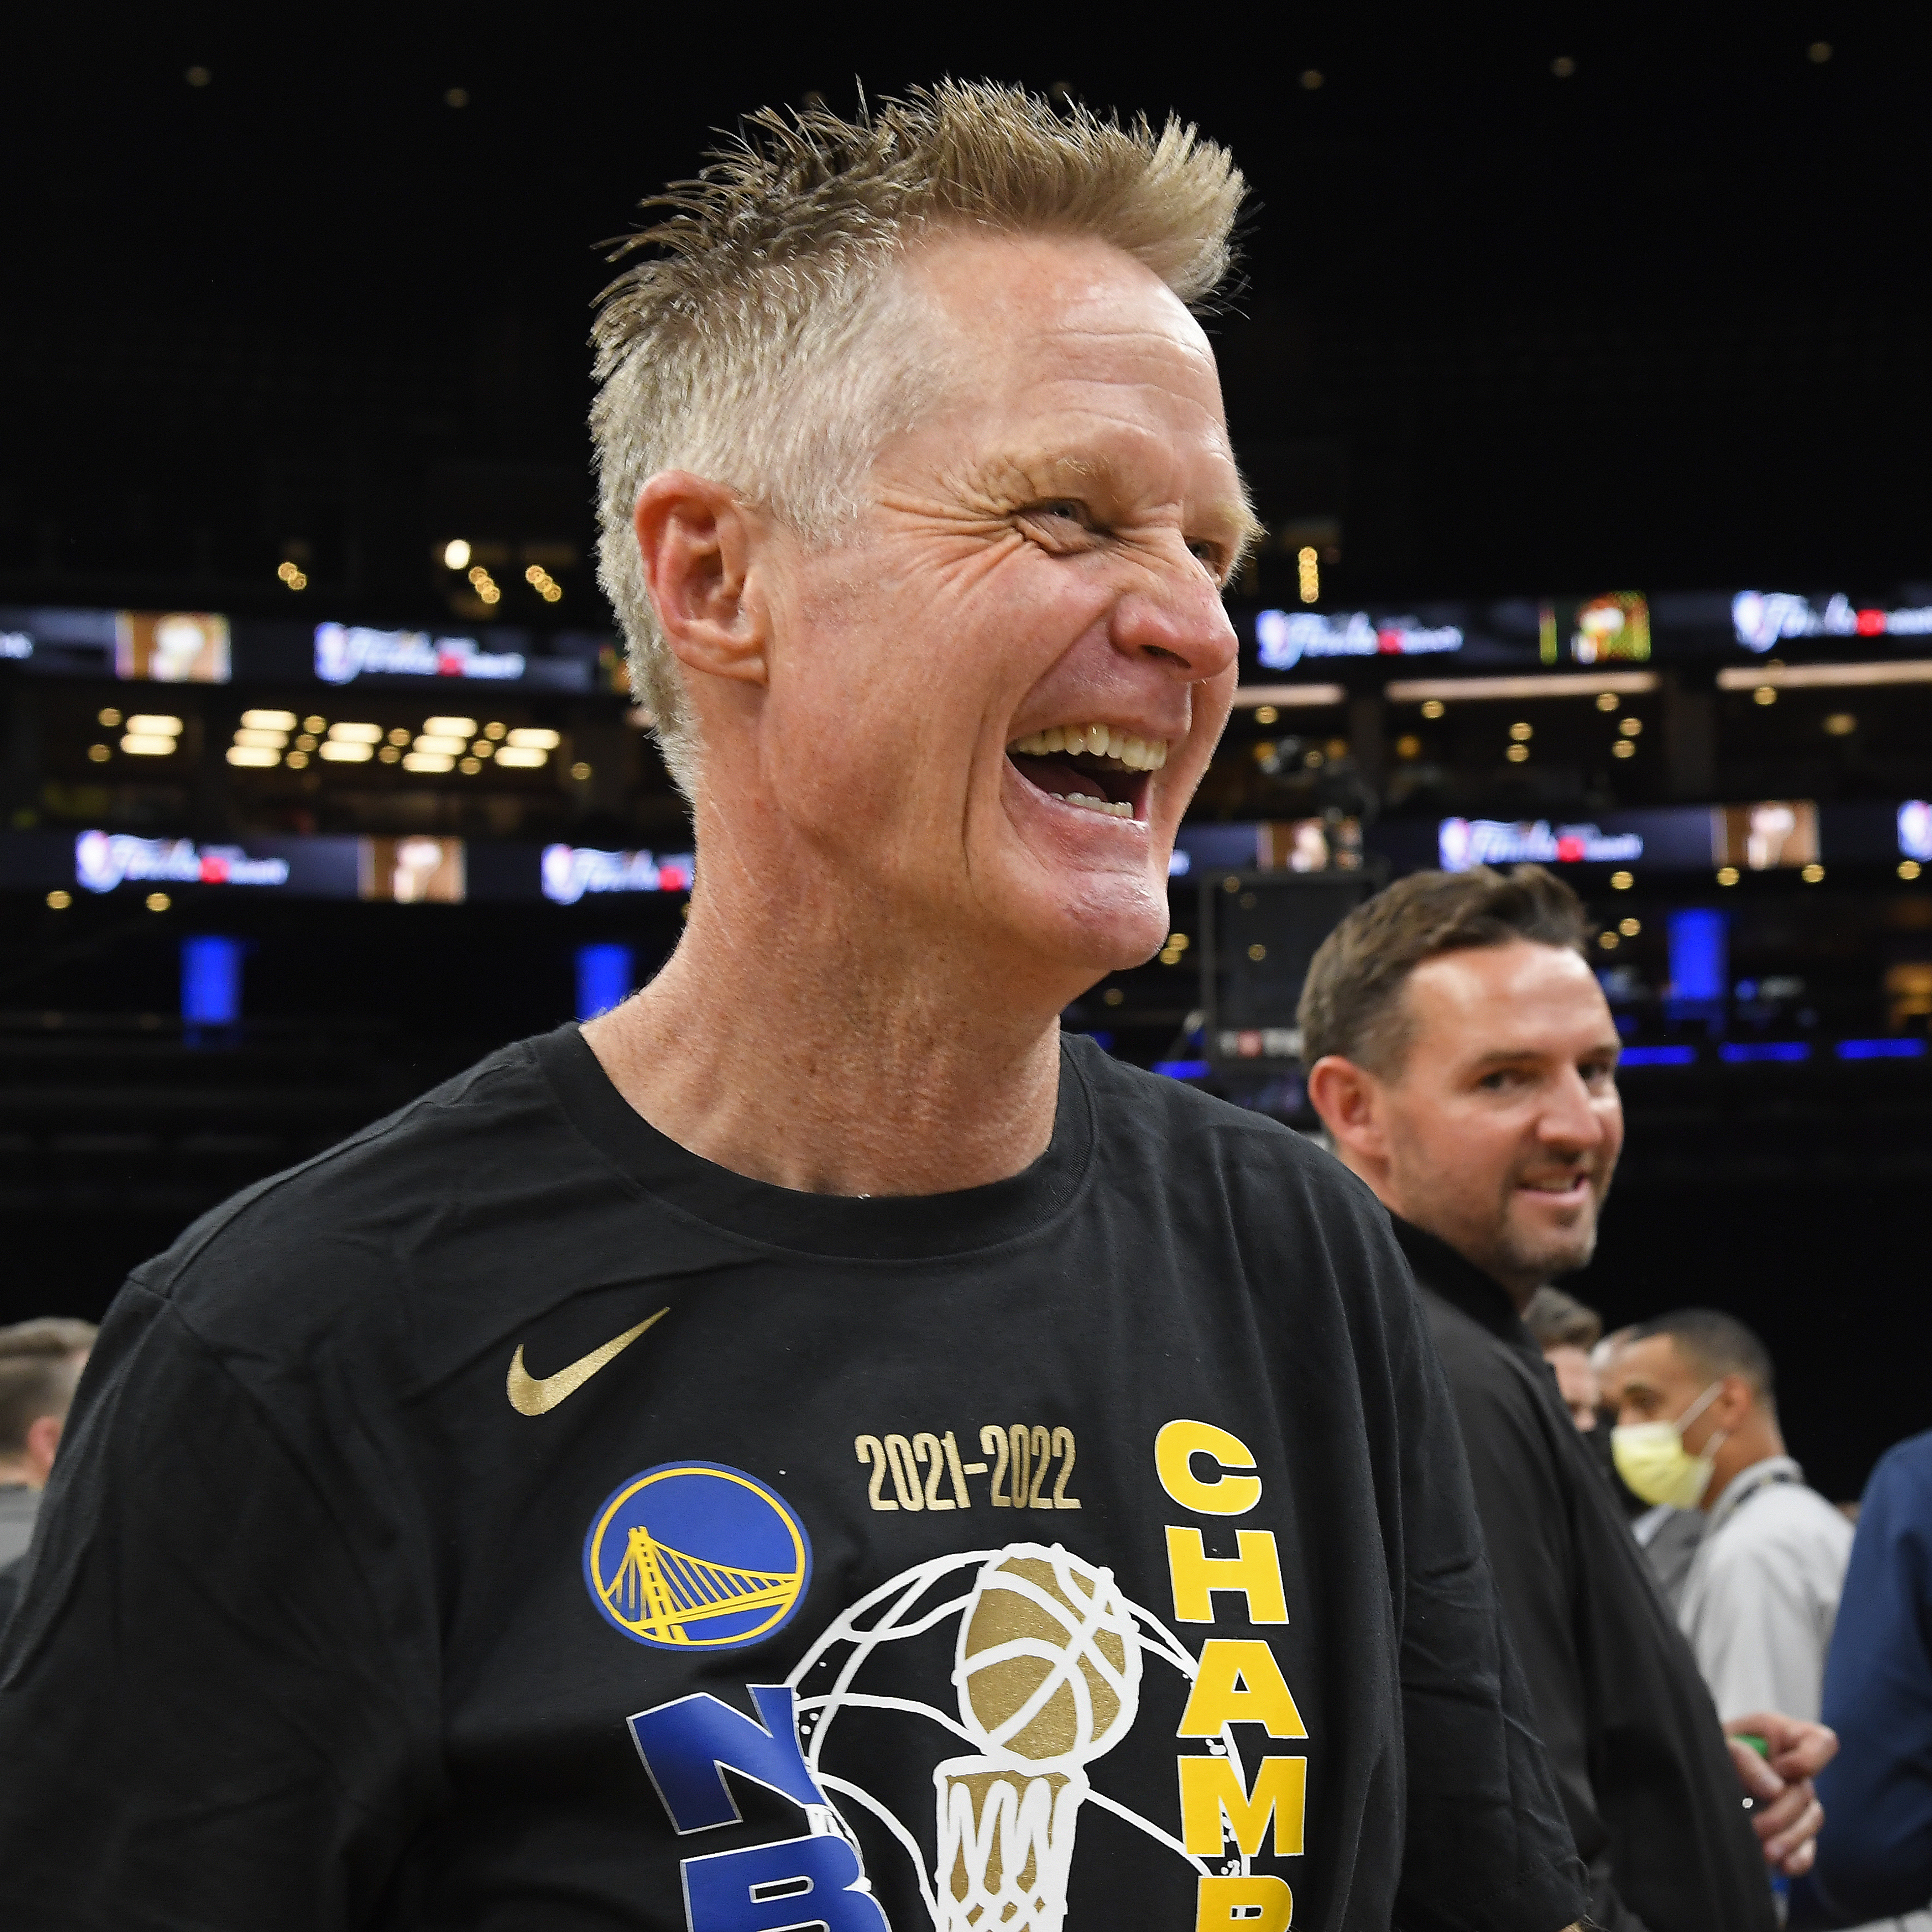 Steve Kerr Says Celtics Fans ‘Crossed the Line’ with Draymond Green Chants in Finals